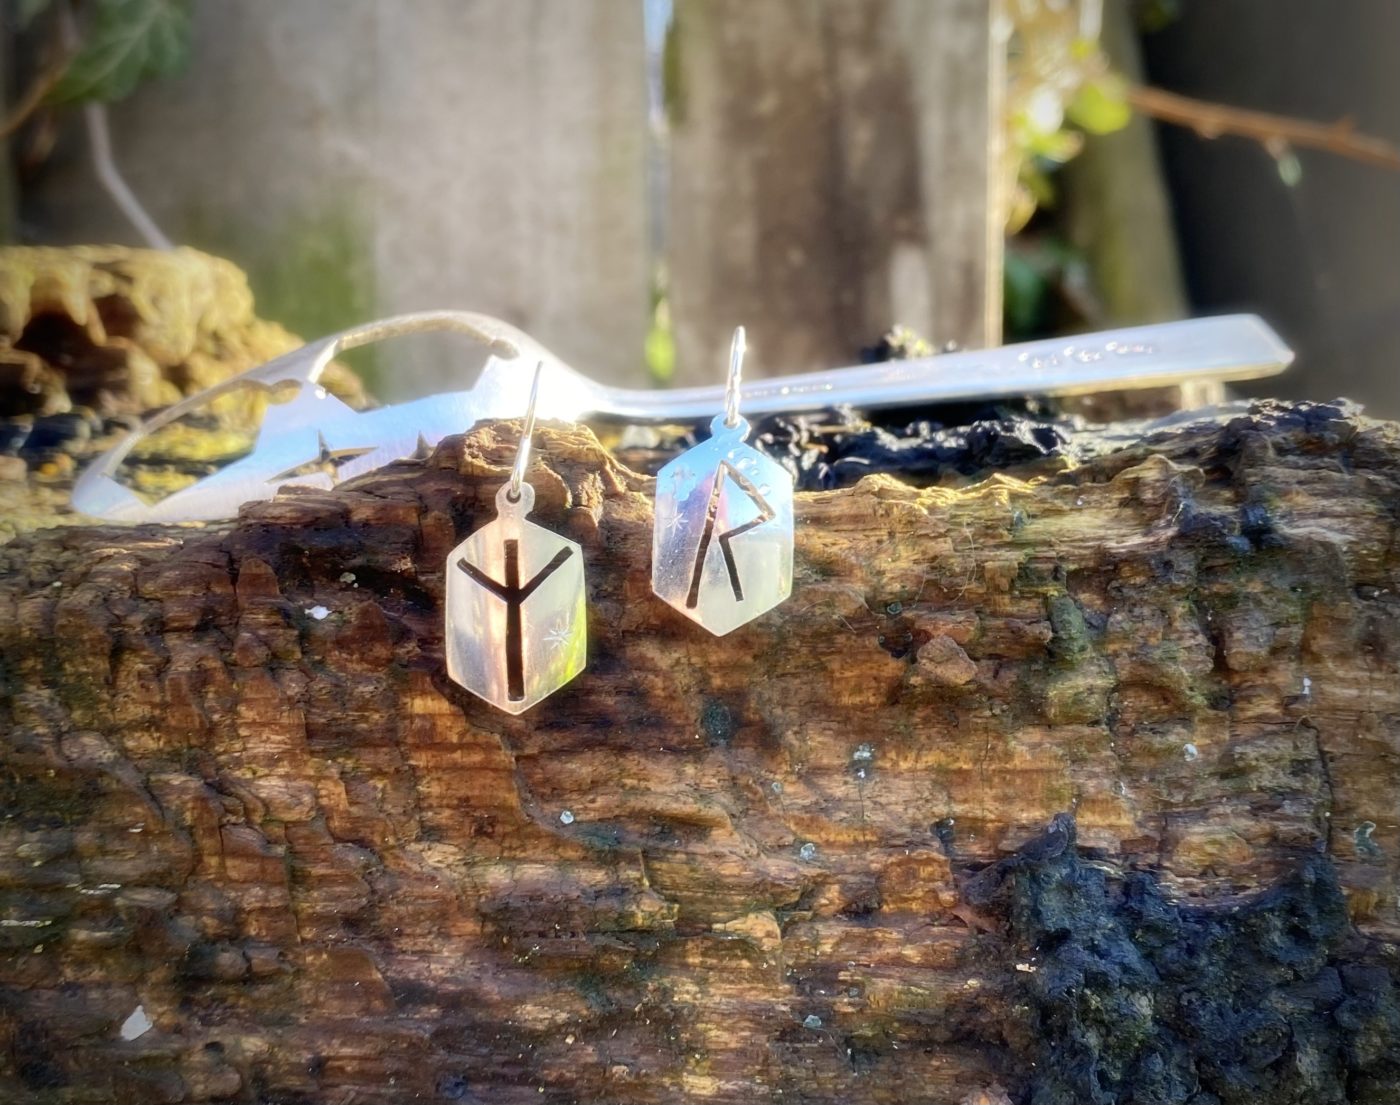 rune jewellery earrings made from recycled raw materials. Handmade ethical rune earrings